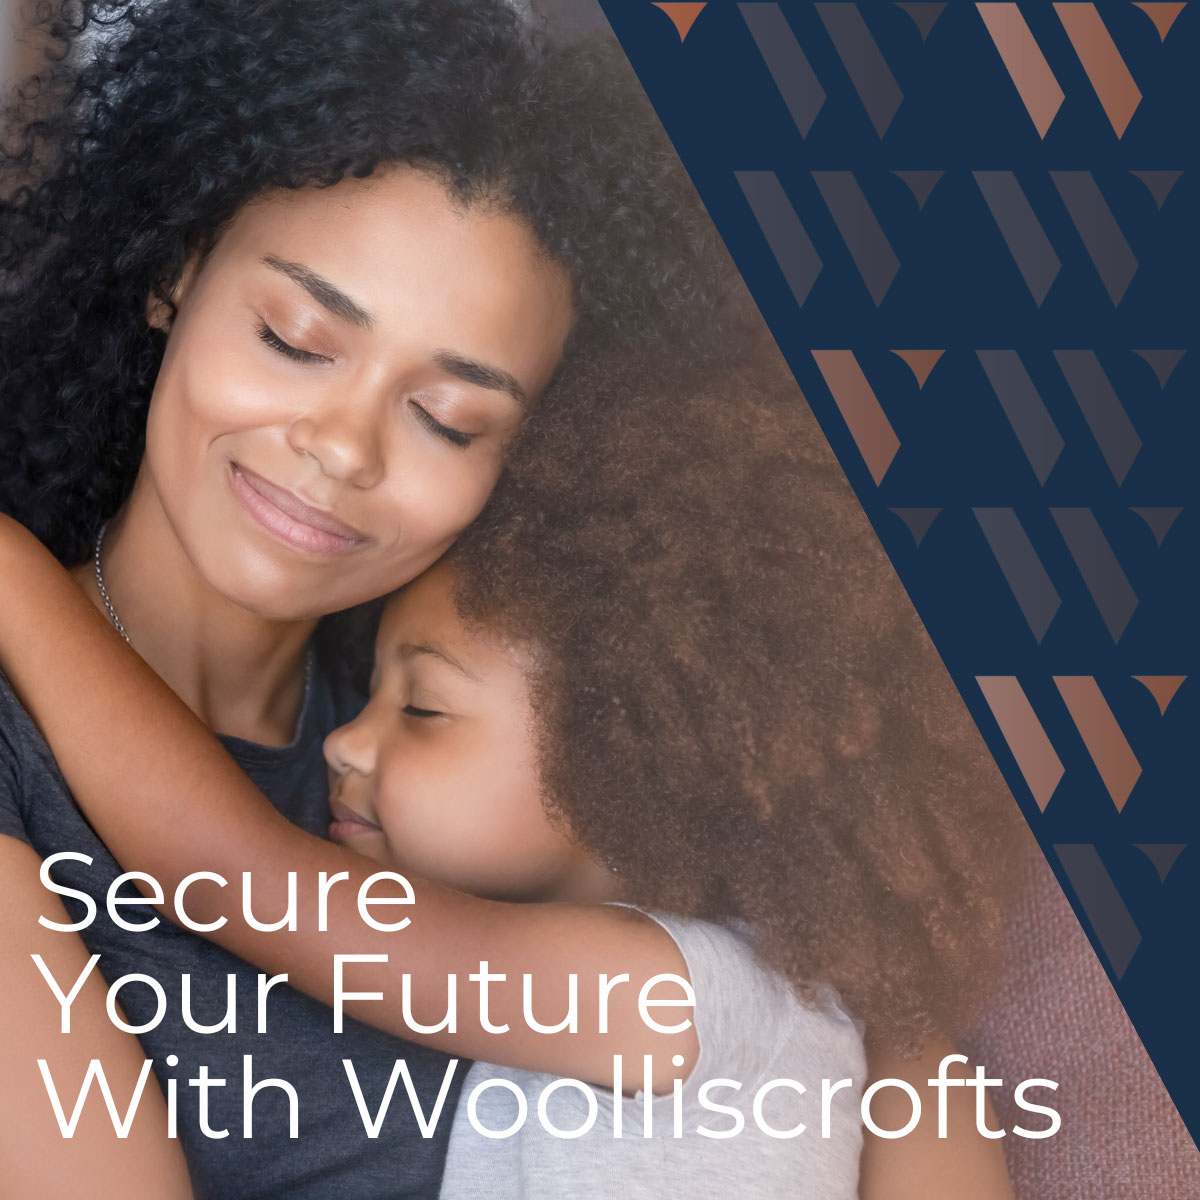 Secure Your Future with Woolliscrofts